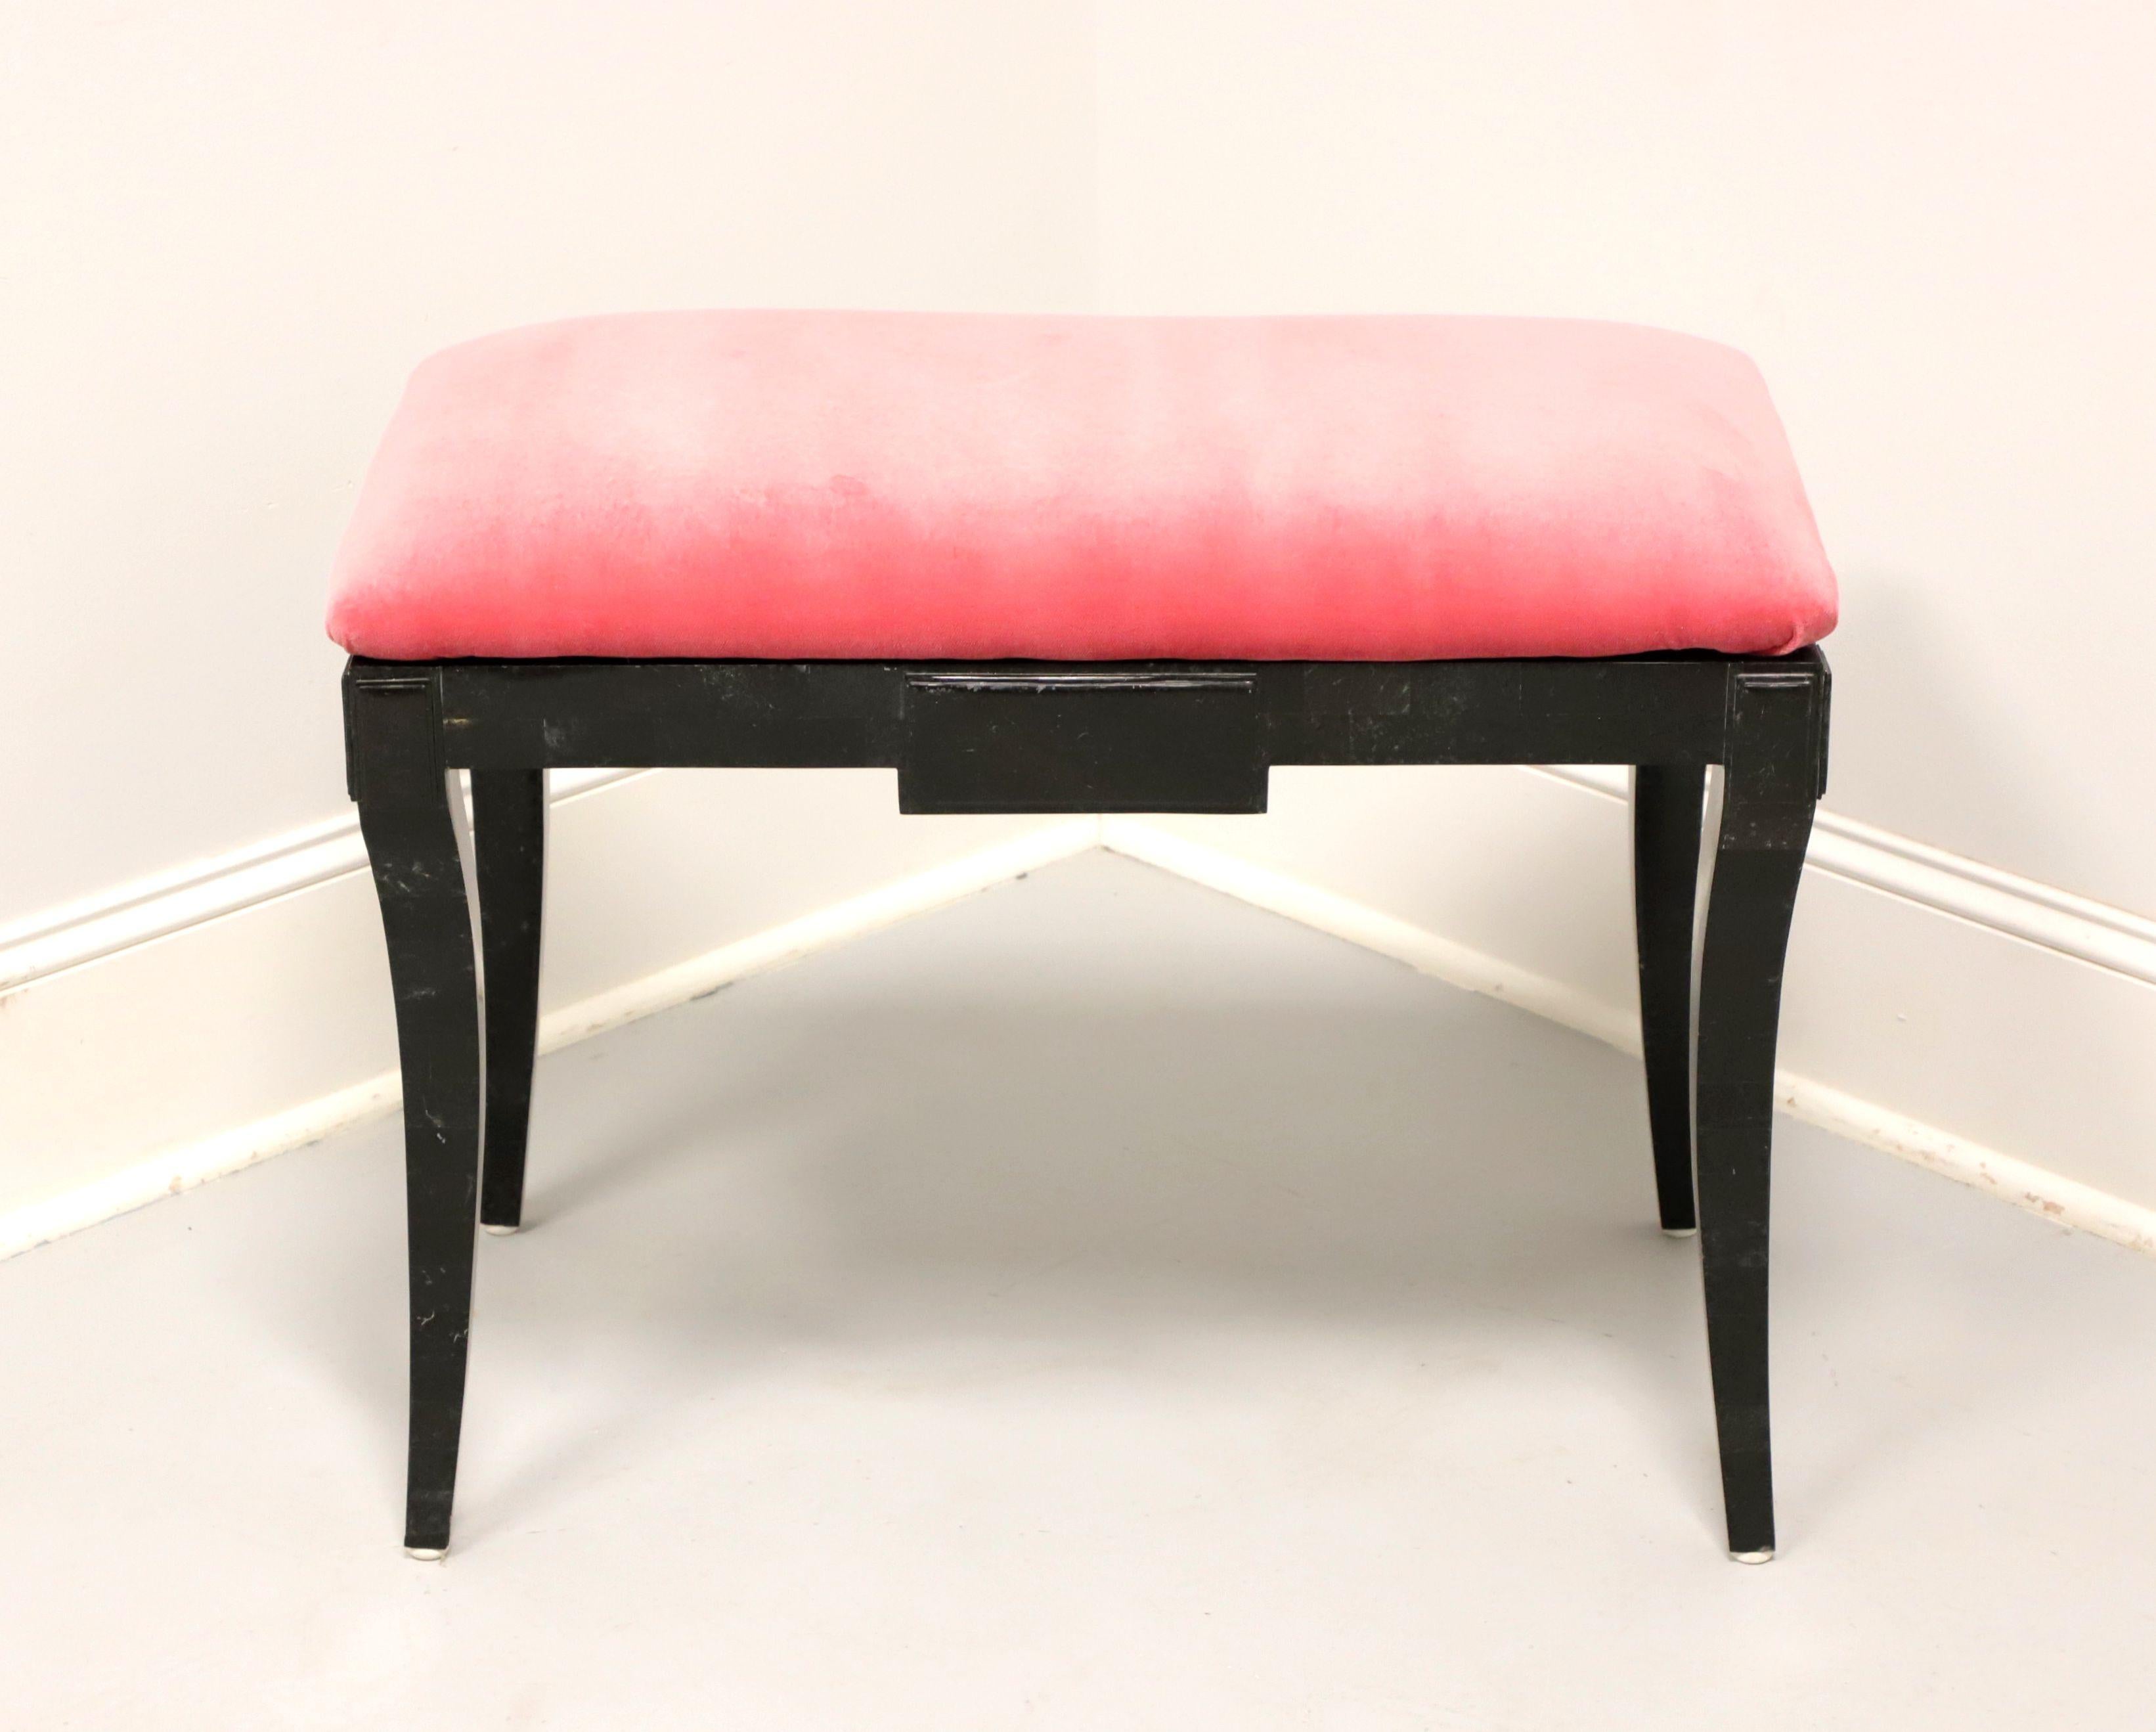 A Neoclassical style vanity bench by Casa Bique, of Thomasville, North Carolina, USA. Solid wood frame with tessellated green/black marble veneers, pink velvet like fabric upholstered seat, neoclassical elements to the apron, and flared legs. Made